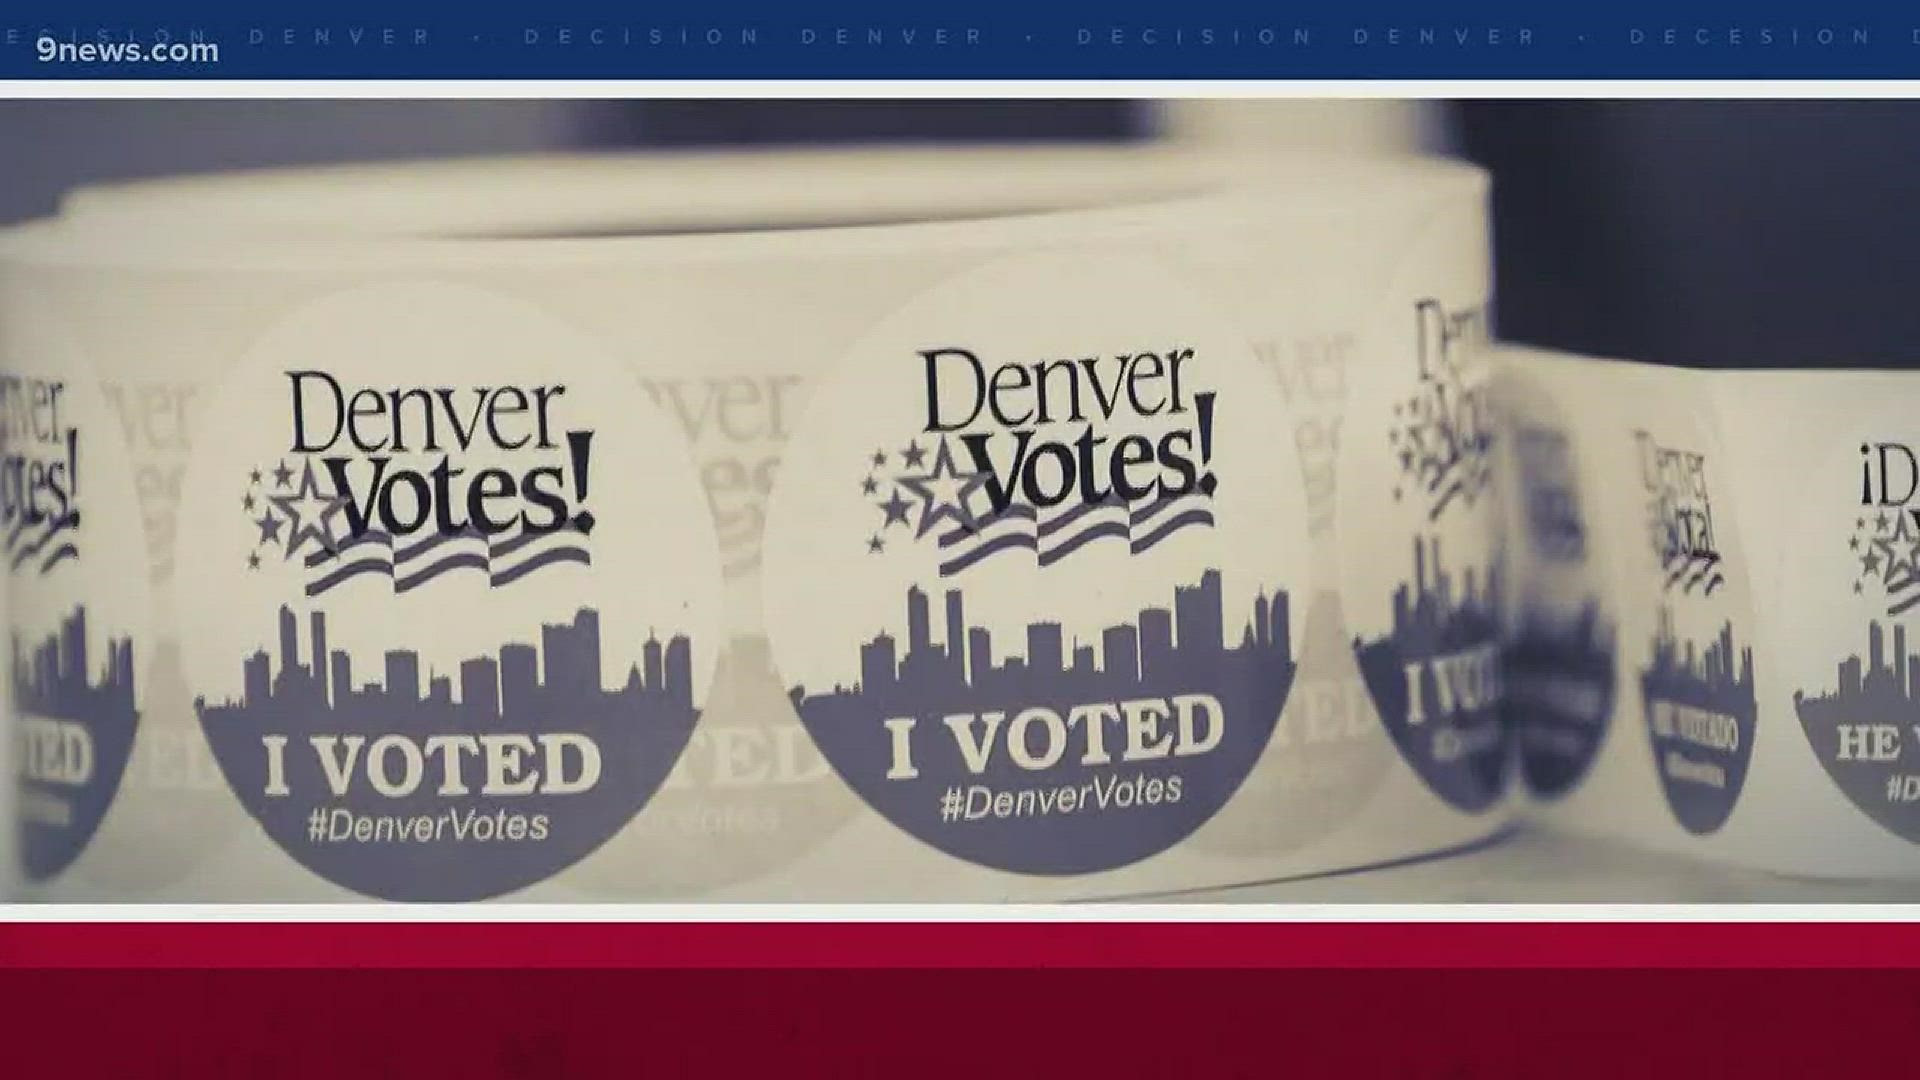 Despite earning the most votes in the municipal election, incumbent Denver Mayor Michael Hancock will need to compete in a runoff election against challenger Jamie Giellis. Political experts Kelly Maher and James Mejía joined us to discuss those results.